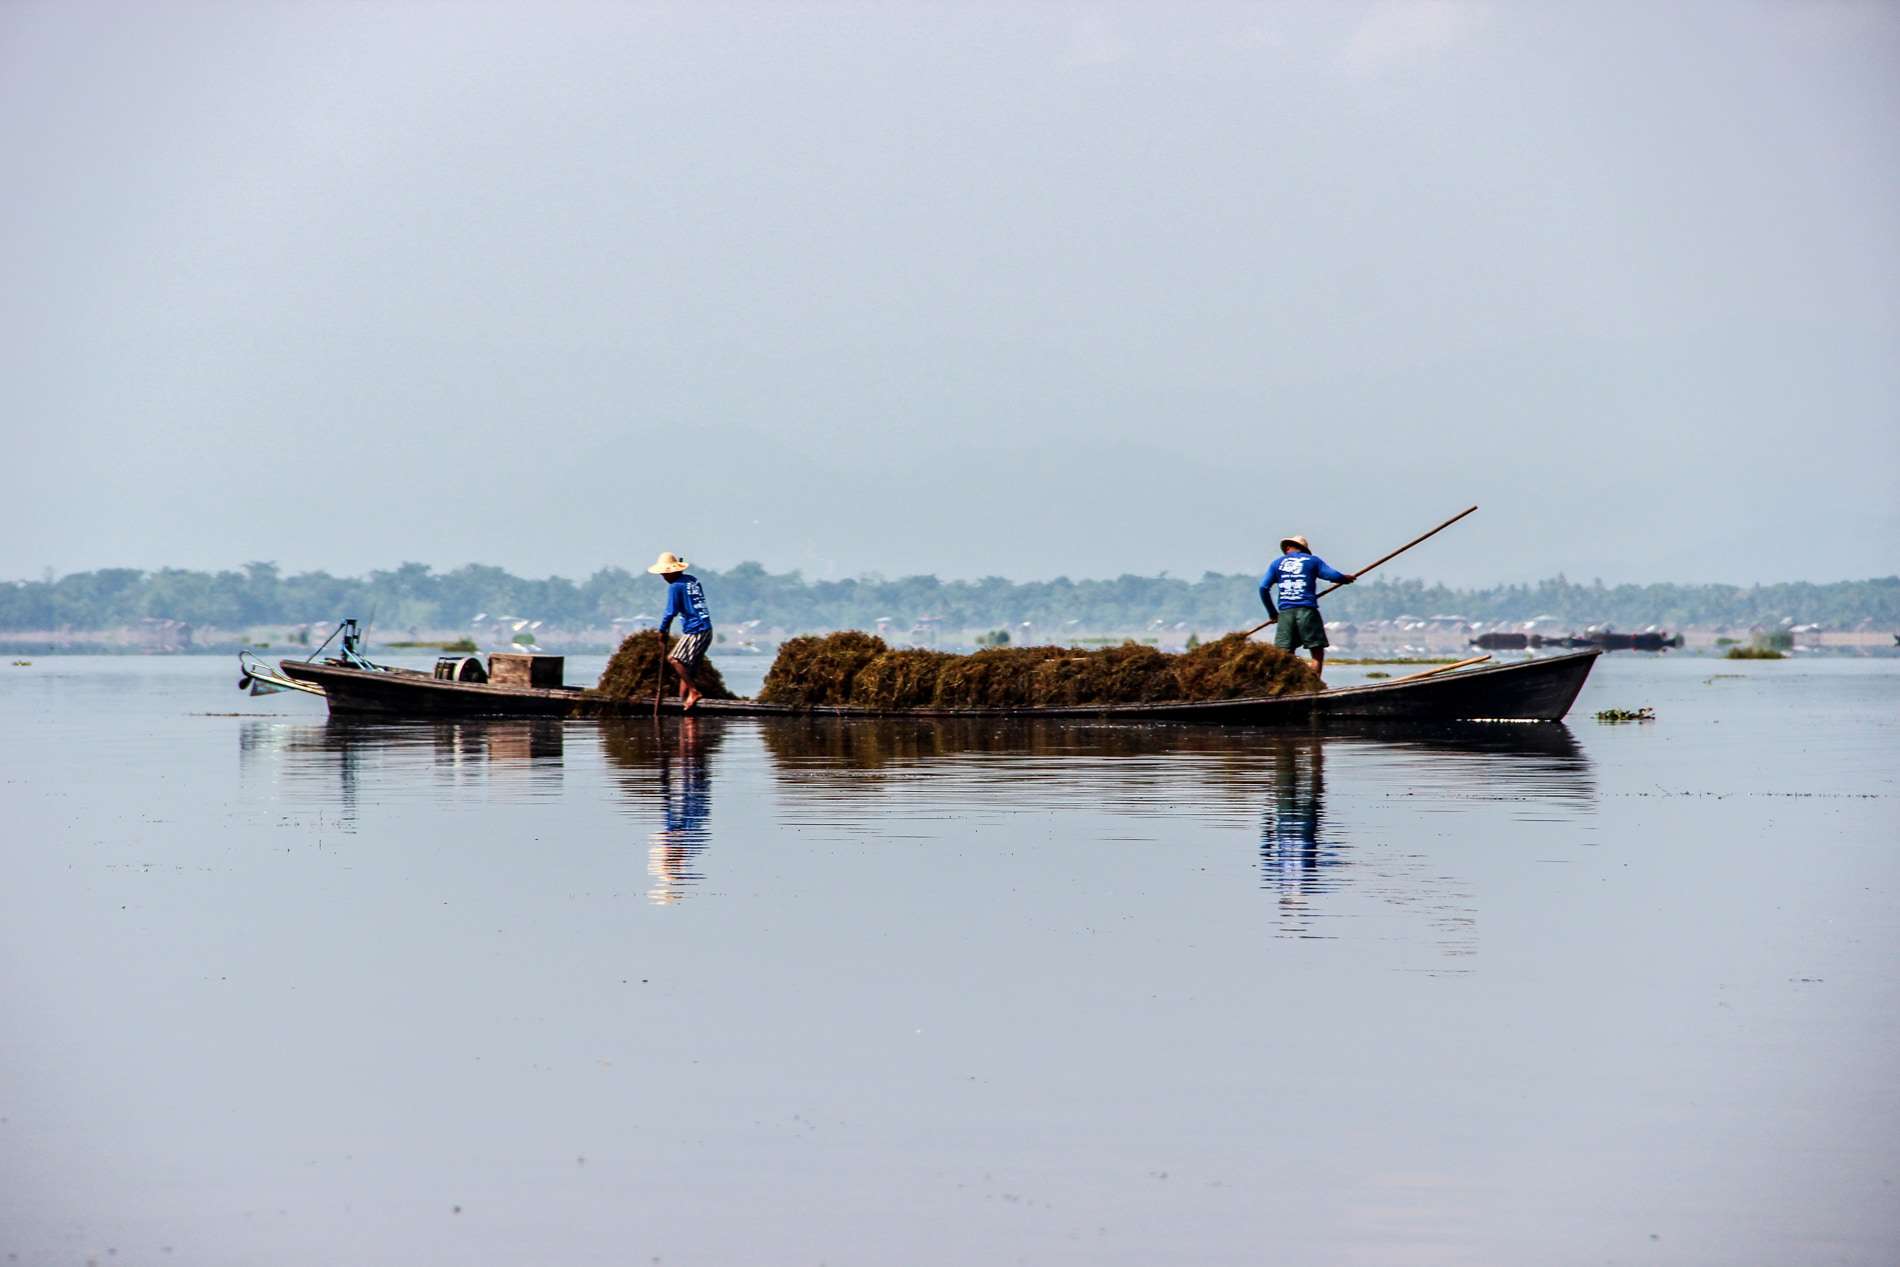 Two fisherman in blue t-shirts load their wooden boat with piles of weeds in the middle of Inle Lake, Myanmar. 